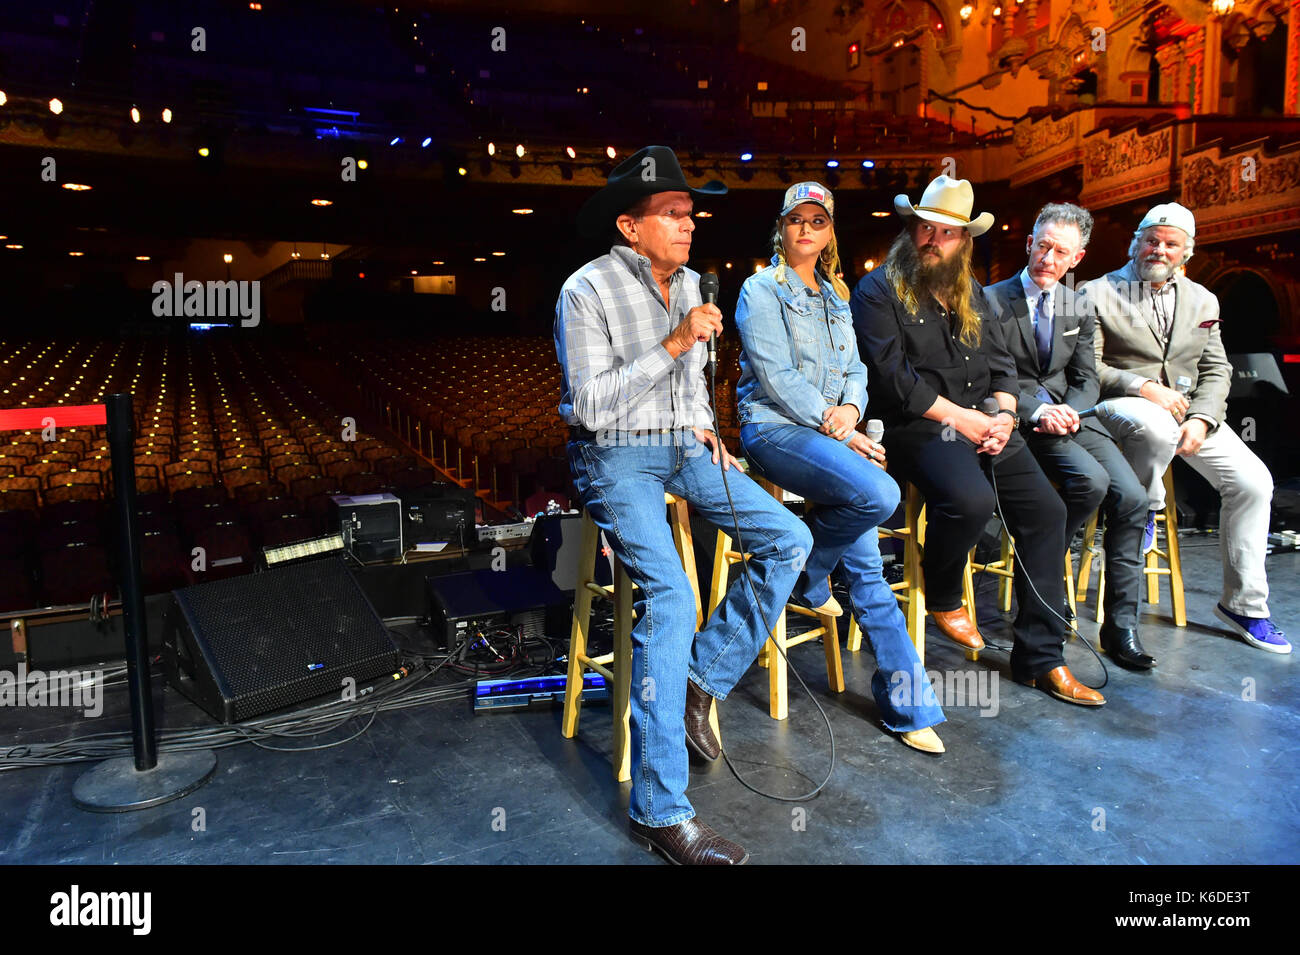 September 12, 2017 - Performers GEORGE STRAIT, MIRANDA LAMBERT, CHRIS  STAPLETON, LYLE LOVETT, and ROBERT EARL KEEN during a press conference at  the Majestic Theater in San Antonio talking about STRAIT's Hand